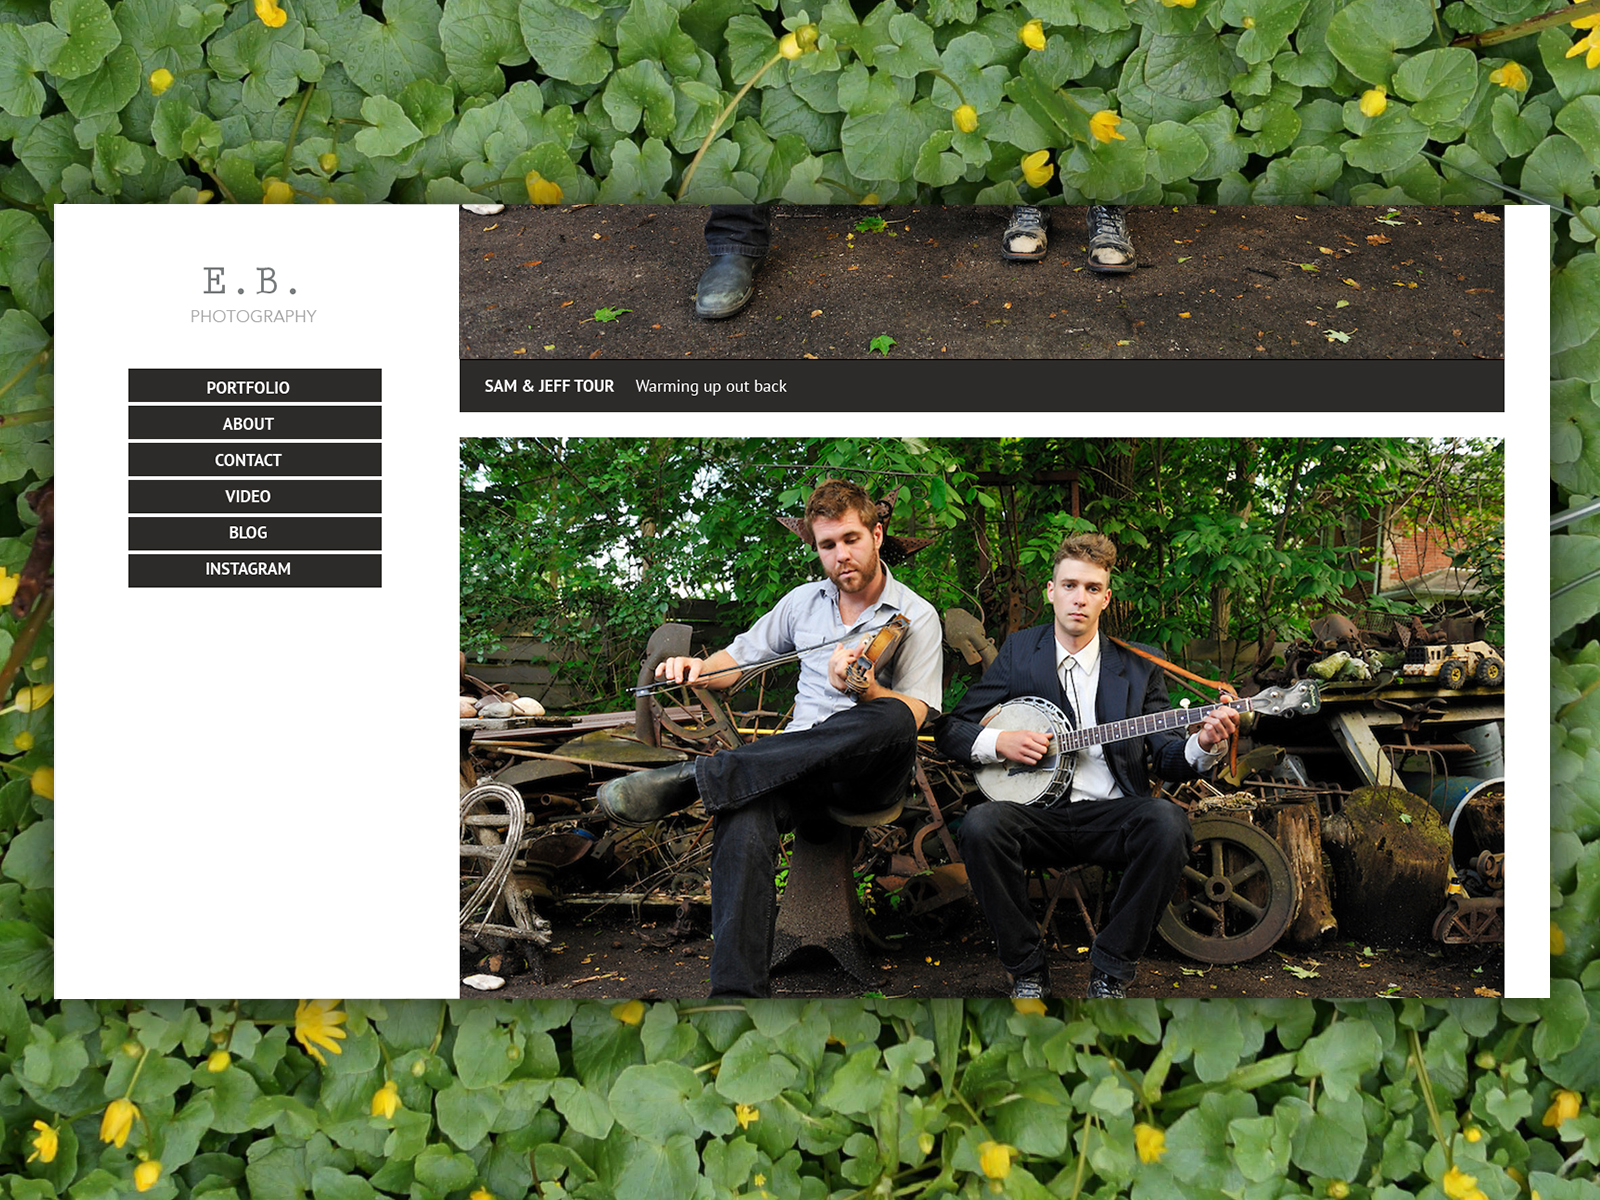 Photography portfolio with a left navigation and a collection of images in the center-right area. The portfolio image shows two musicians, one fiddler and another banjo player, playing outside, surrounded by junk. The entire portfolio is superimposed on a bed of plants.